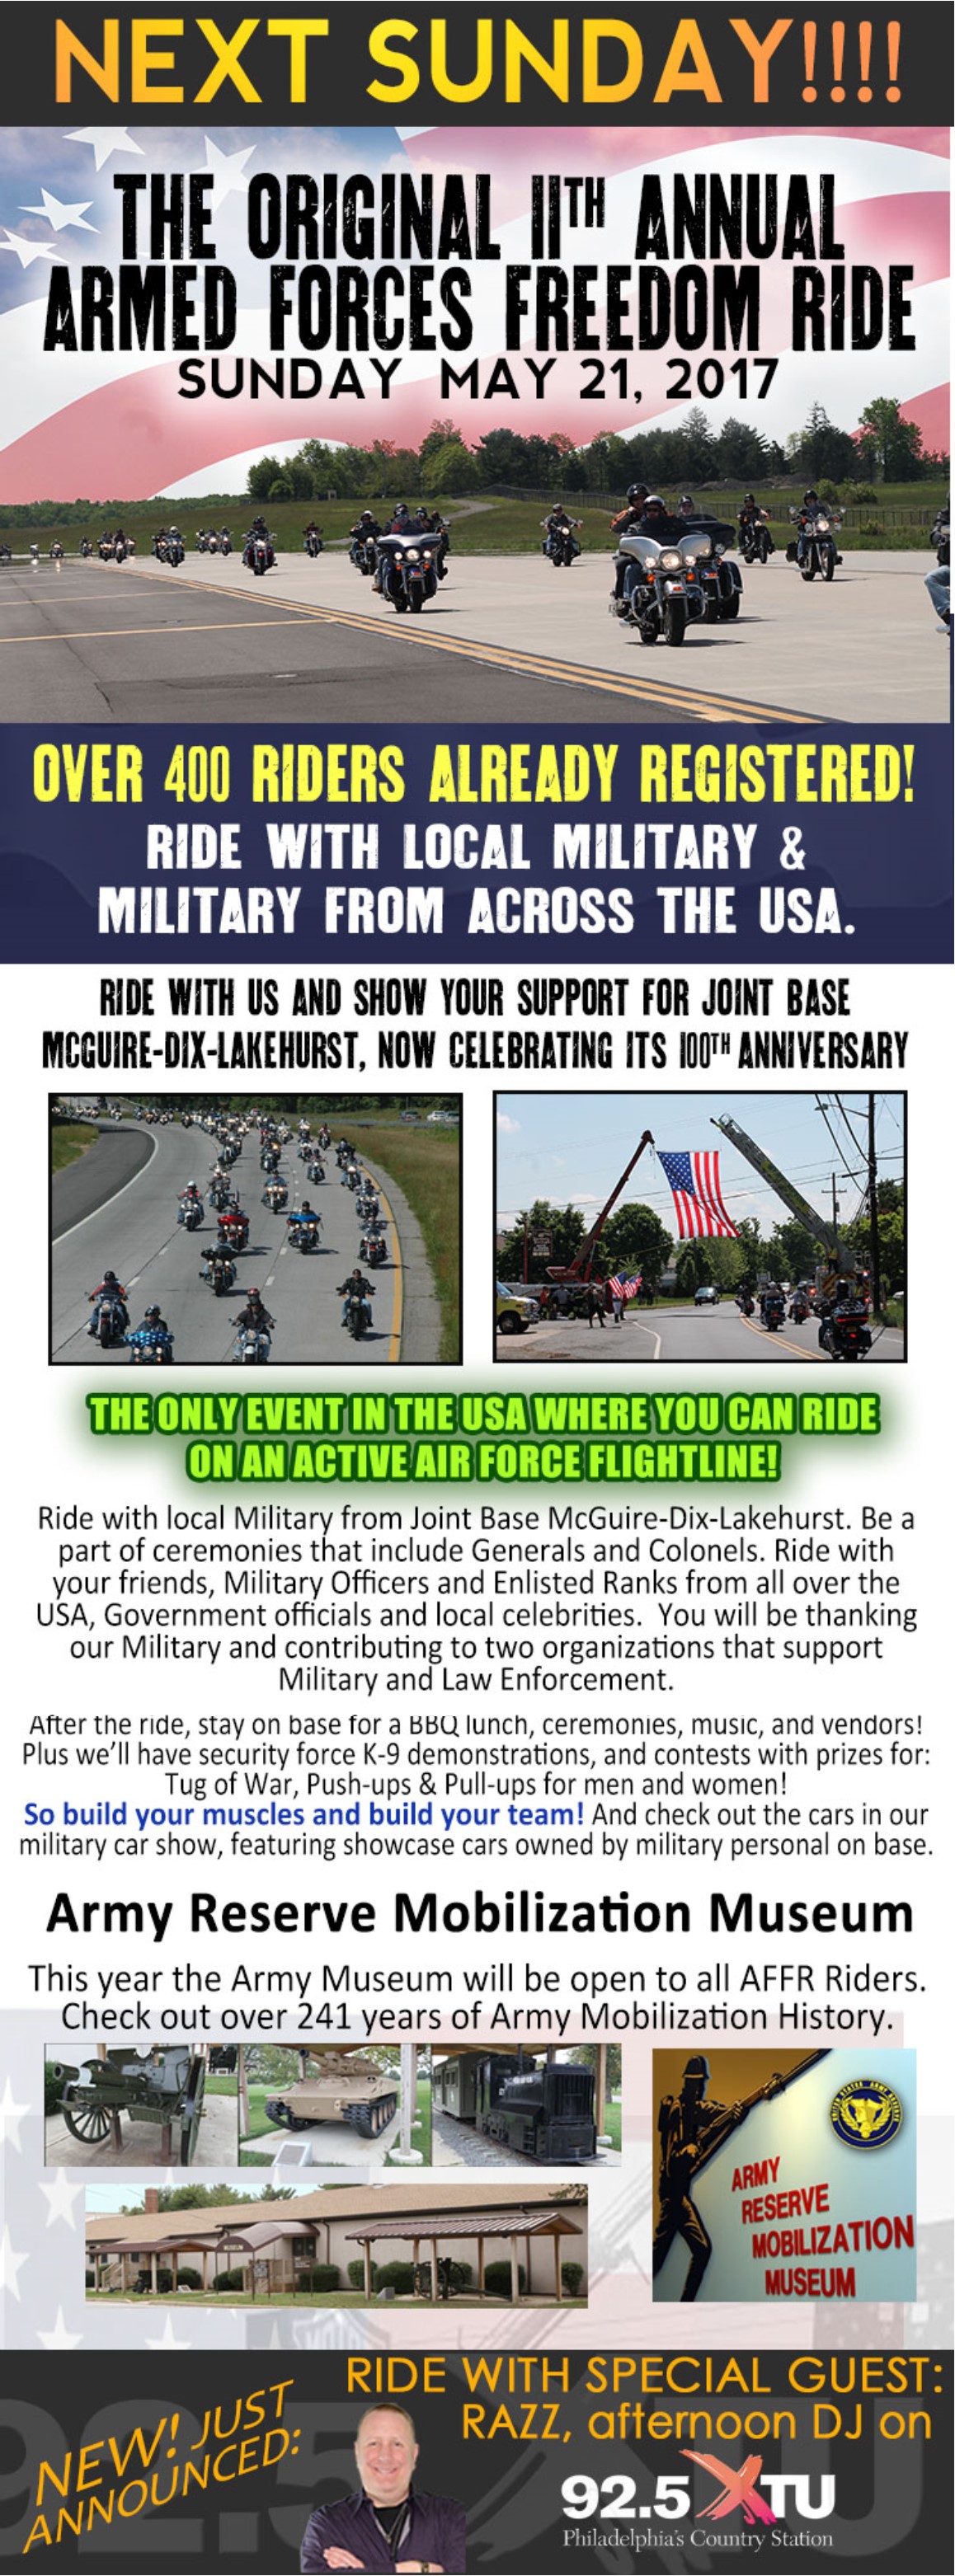 11th Annual Armed Forces Freedom Ride